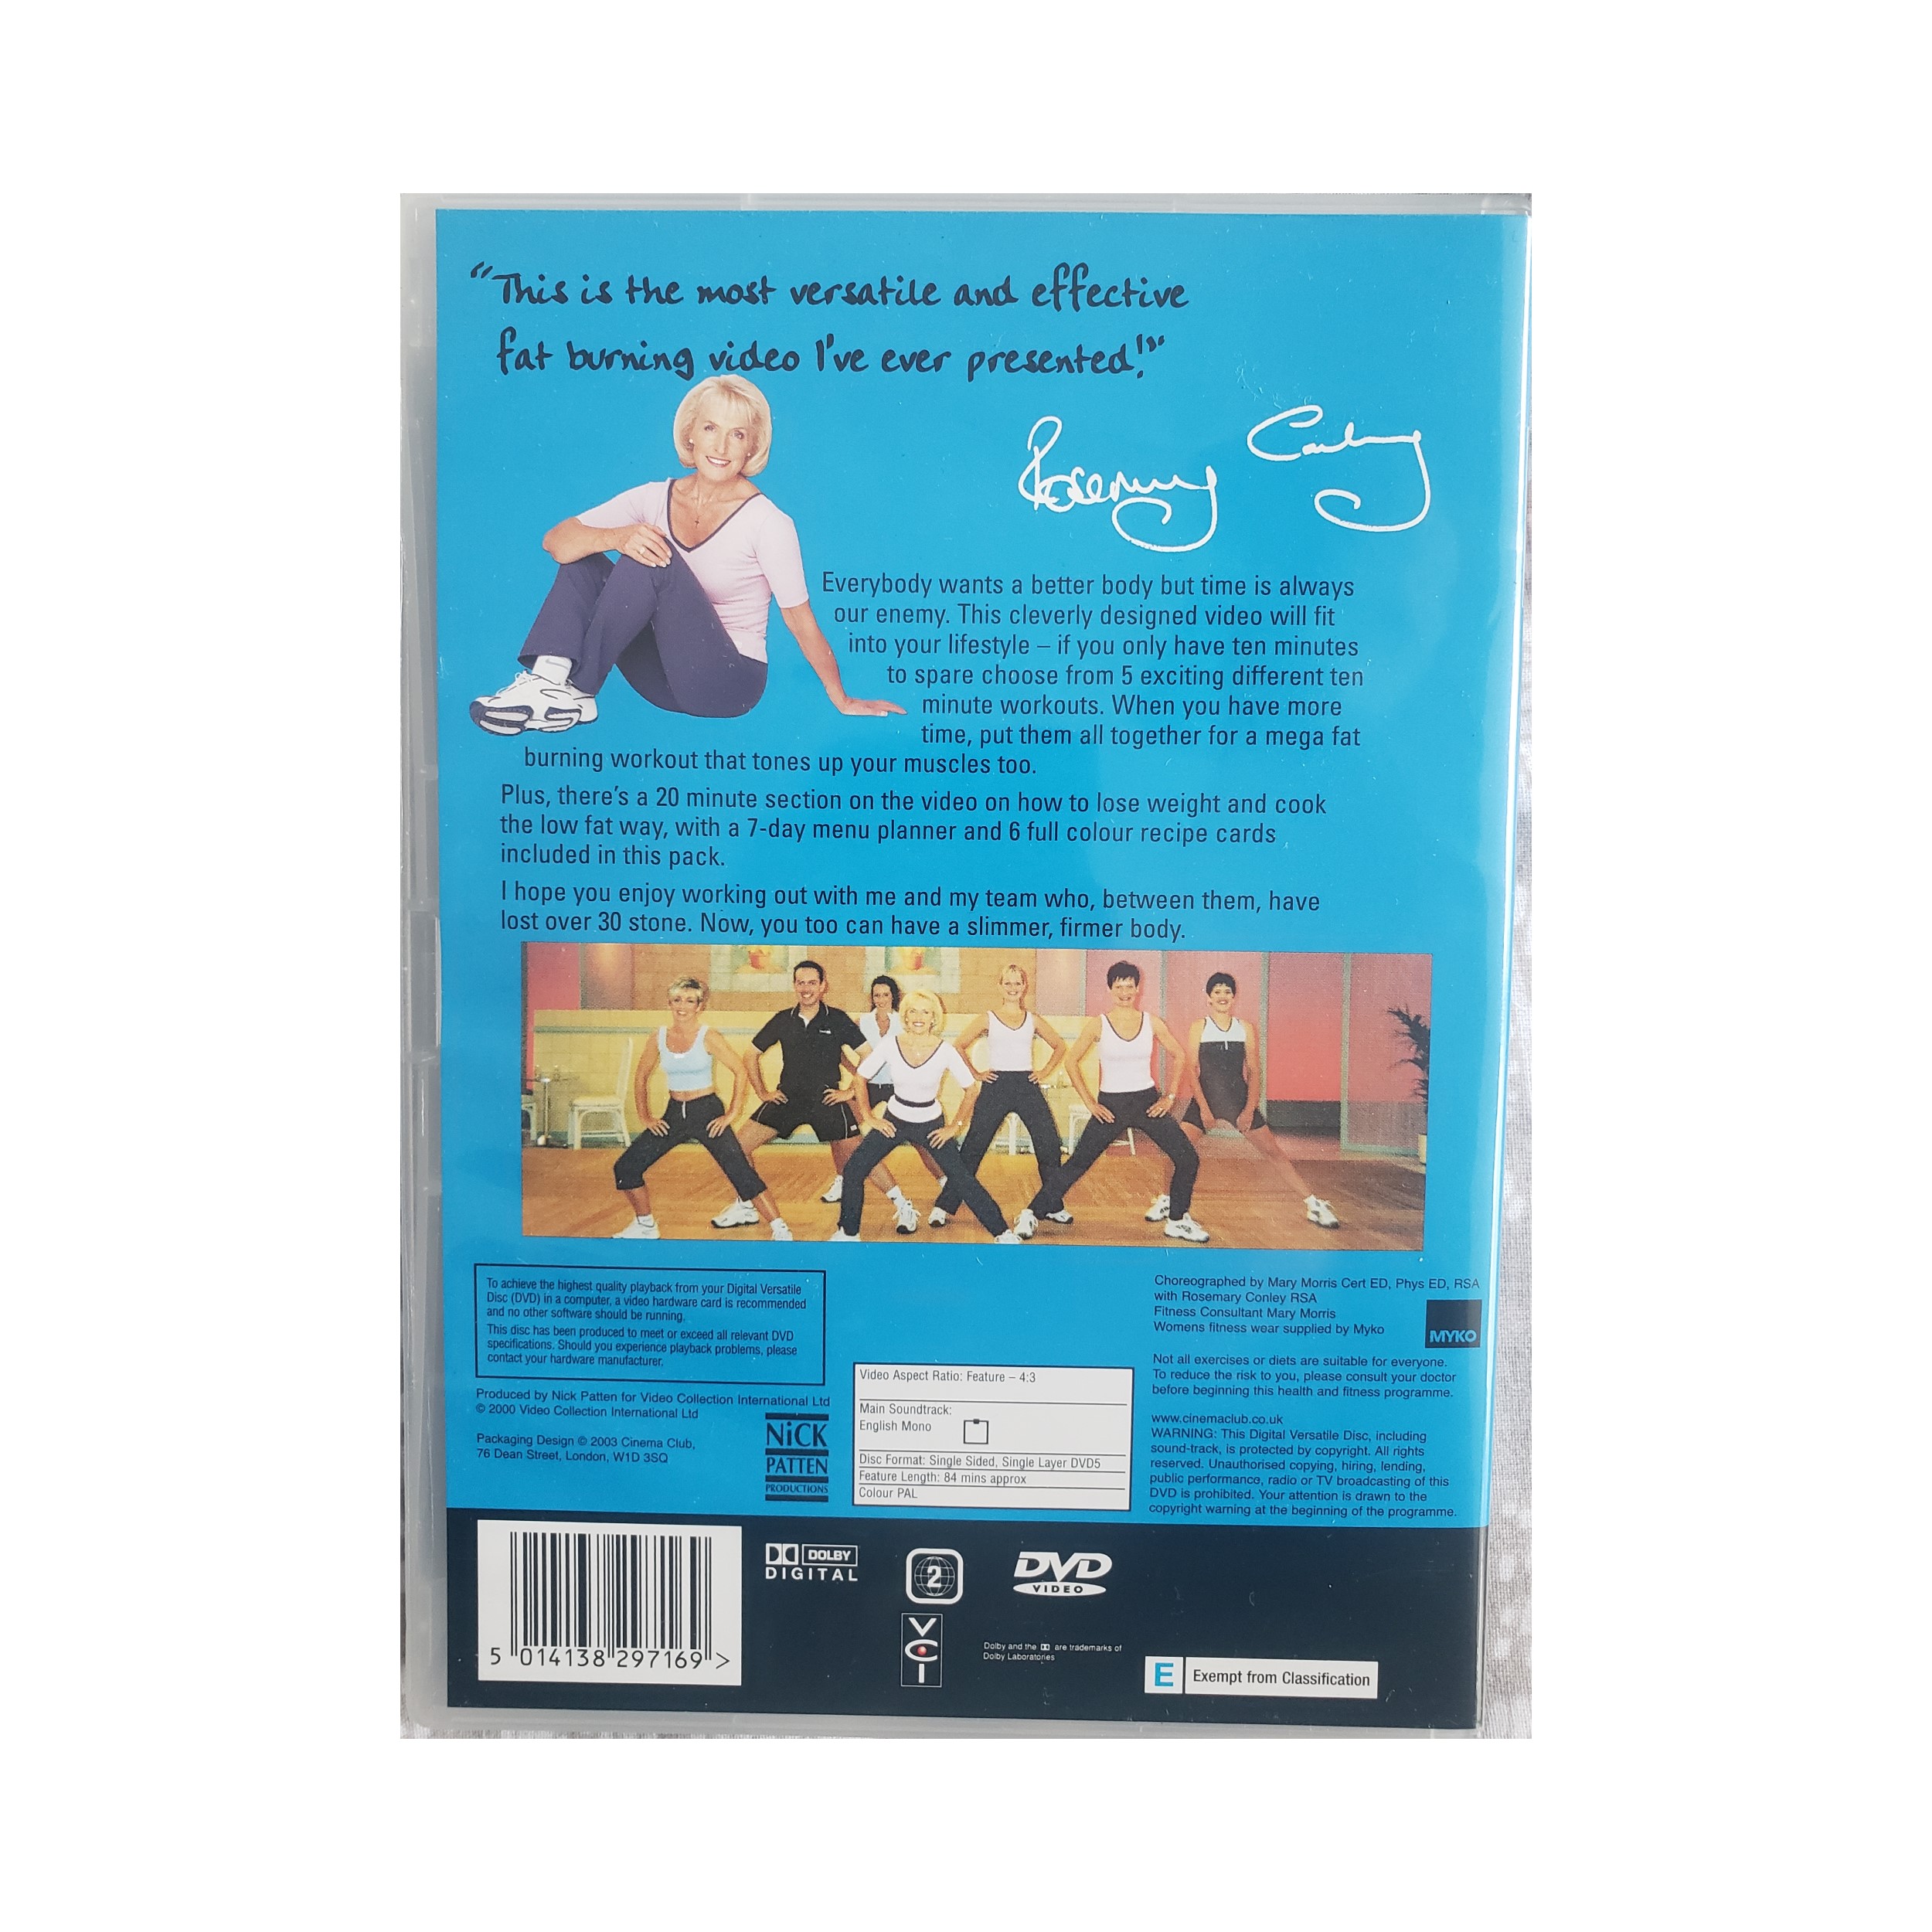 Image of the back cover of Rosemary Conley's Five Day Fat Burner Workout DVD